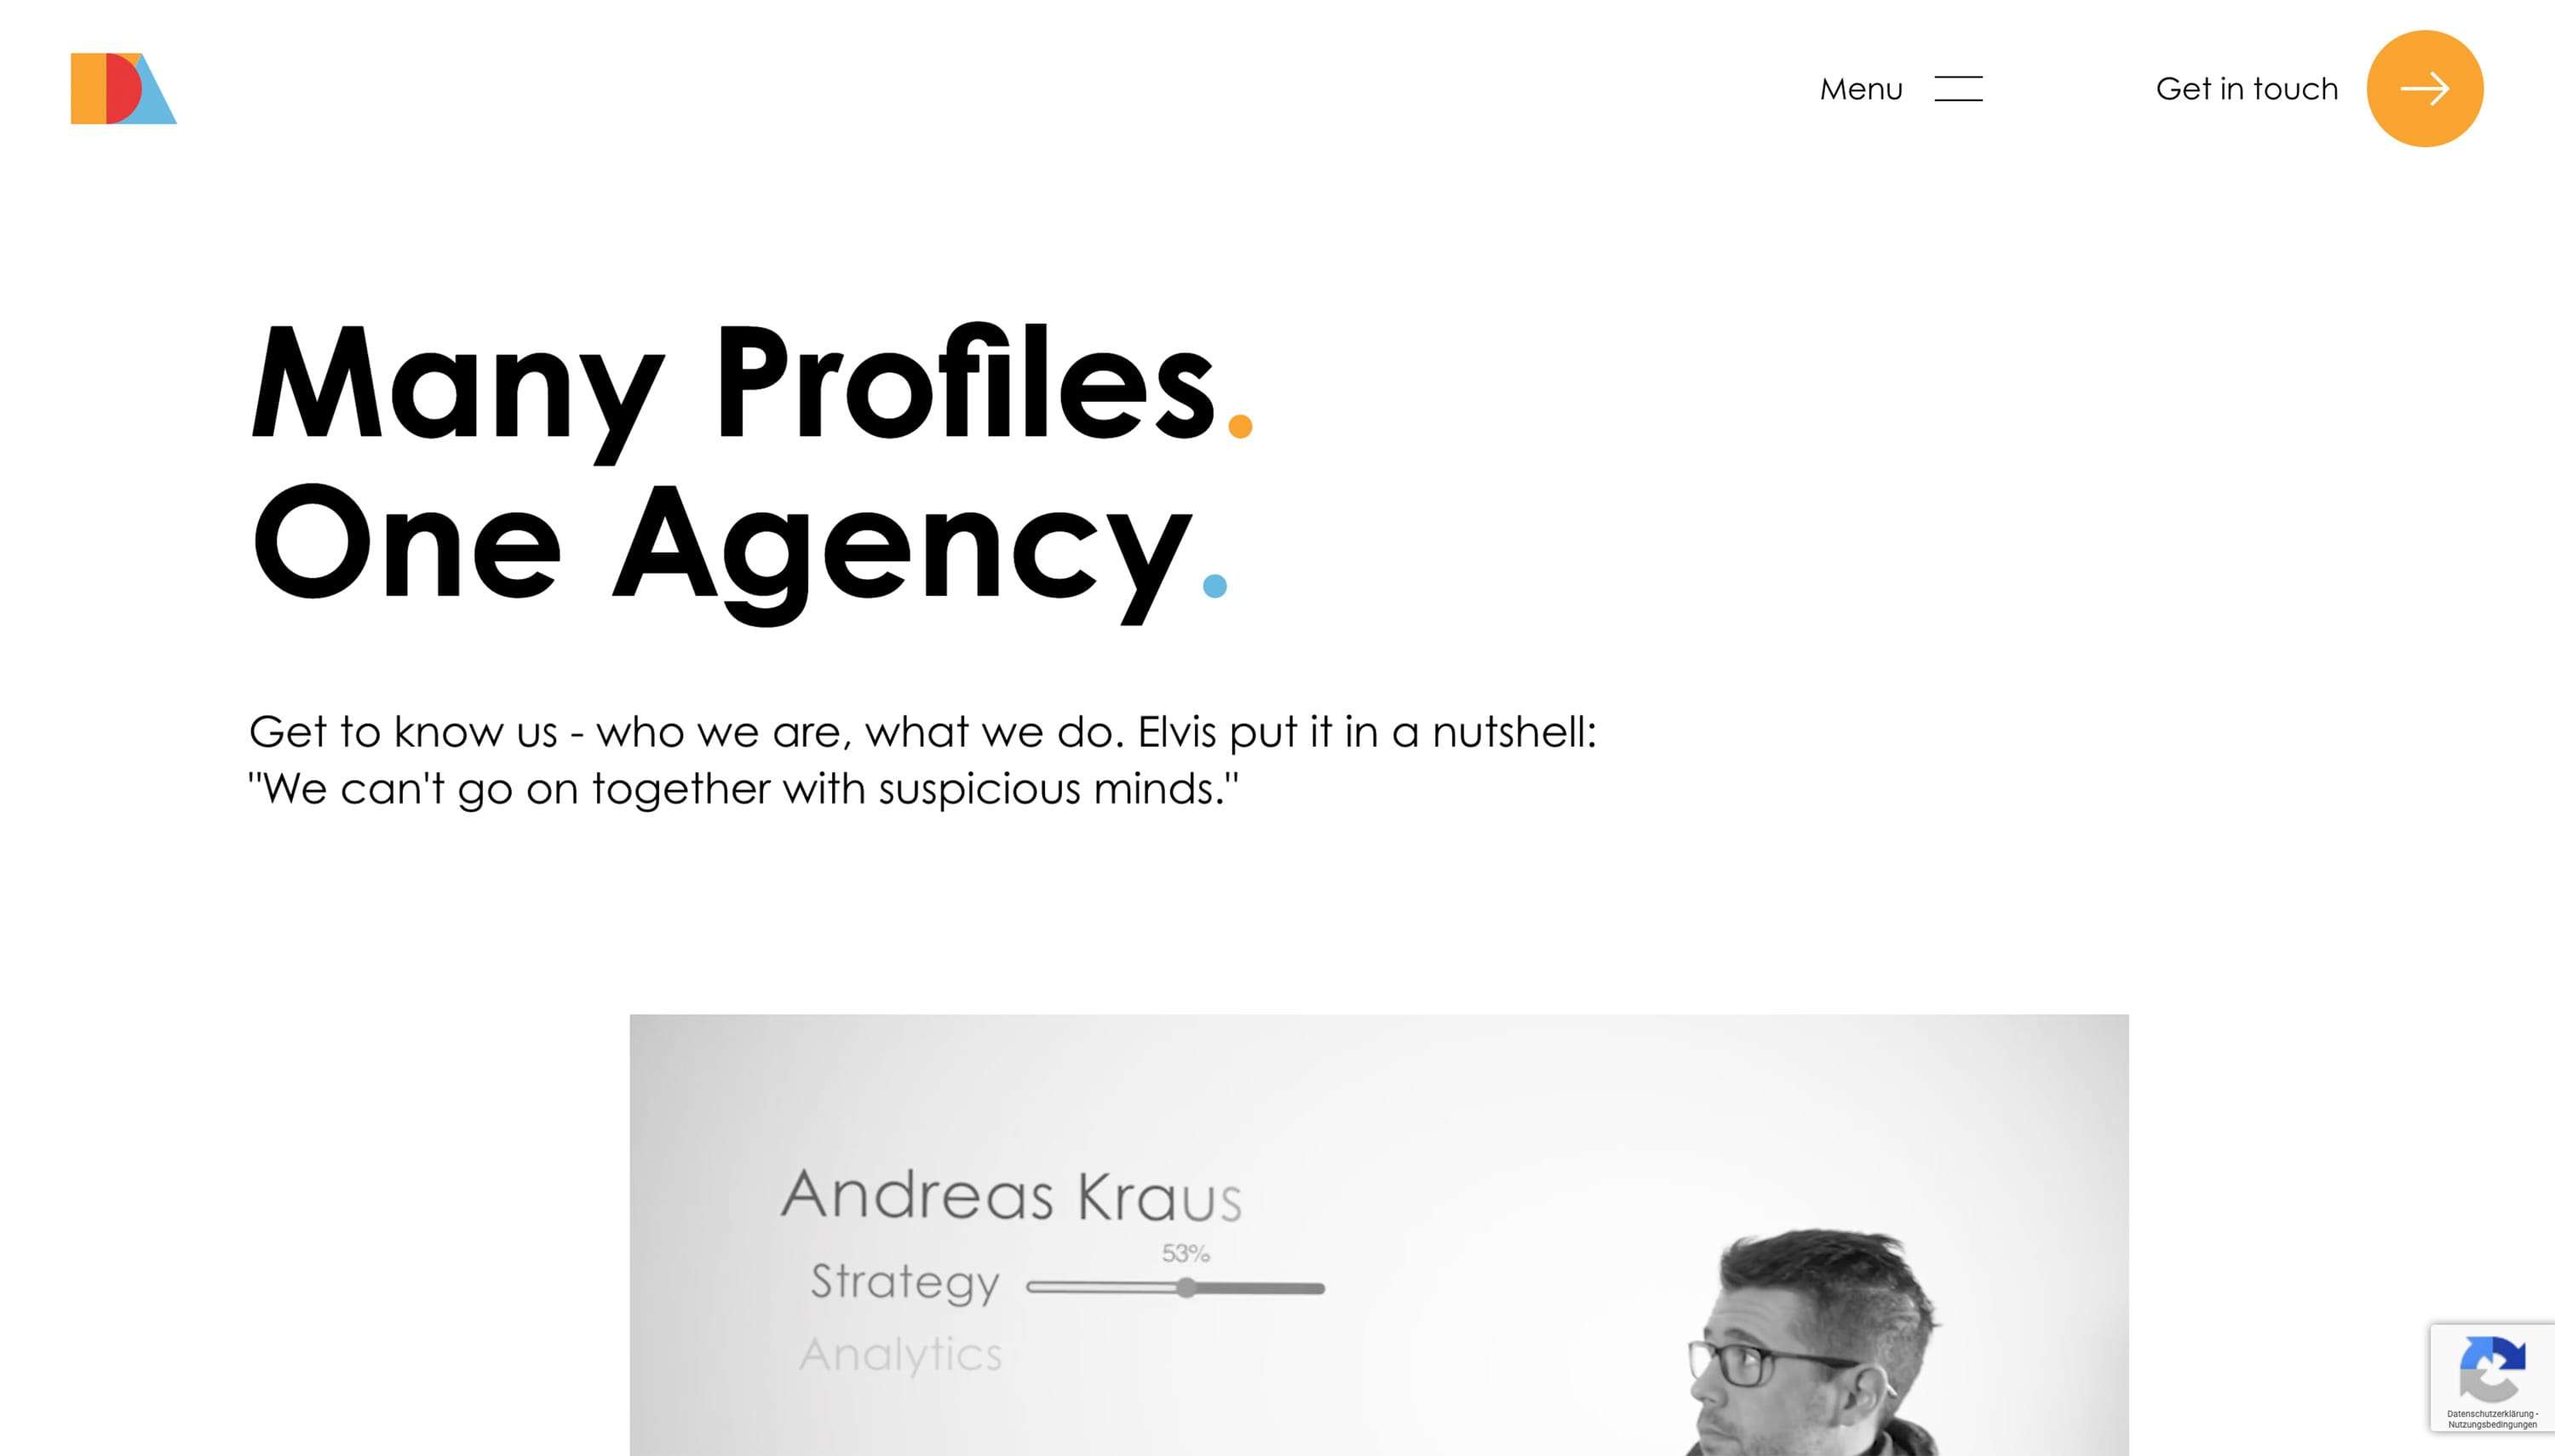 The agency for performance marketing.